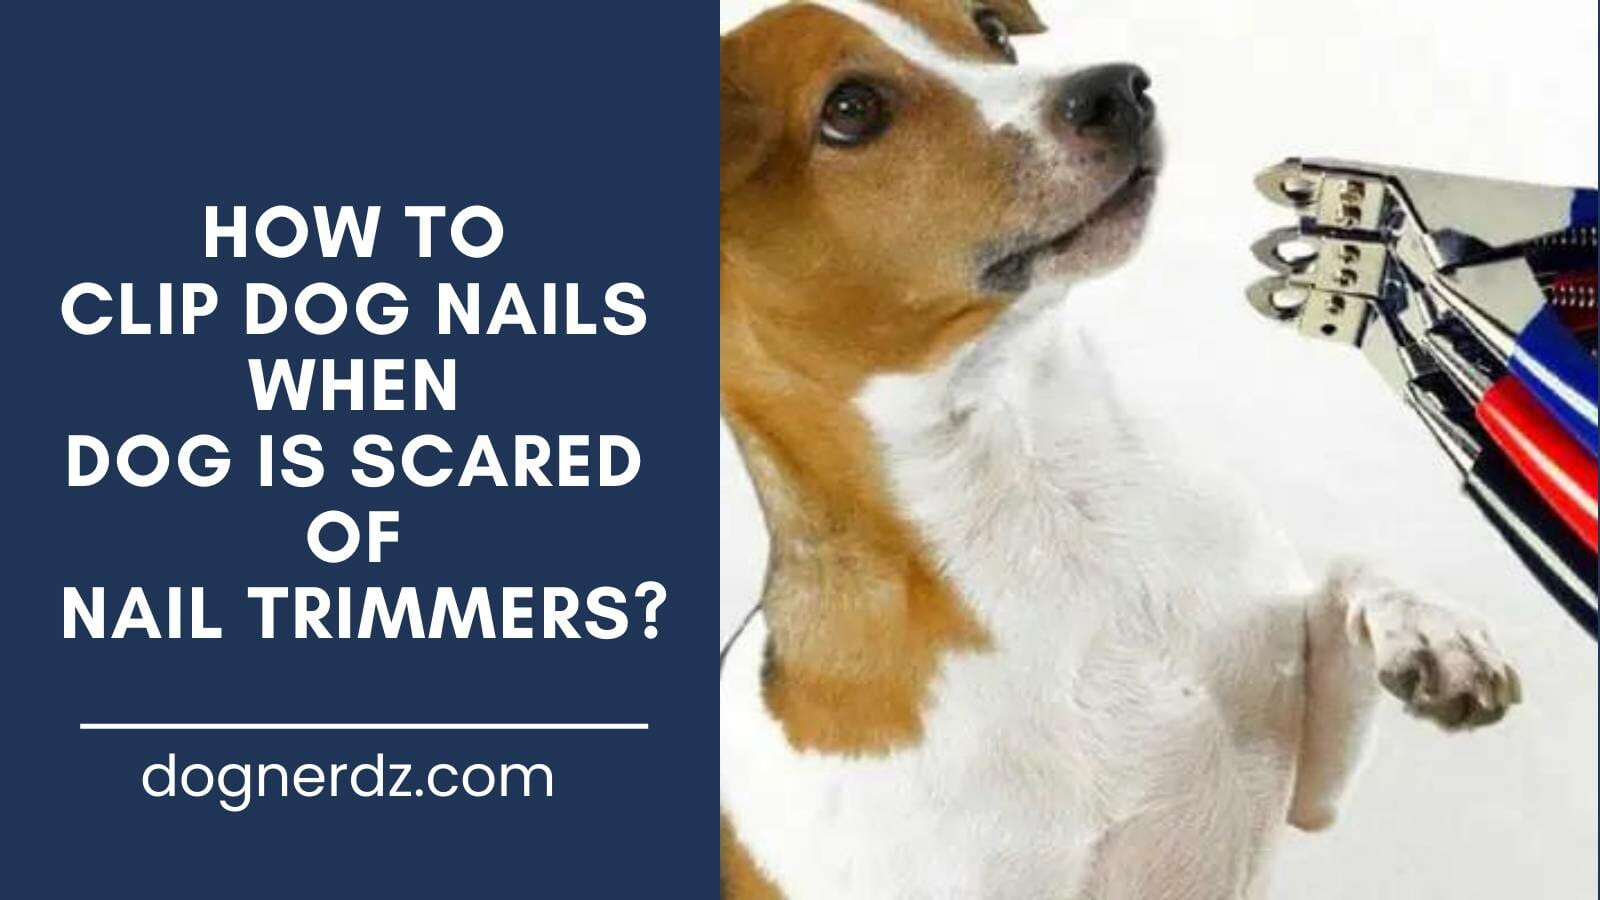 guide on how to clip dog nails when dog is scared of nail trimmers